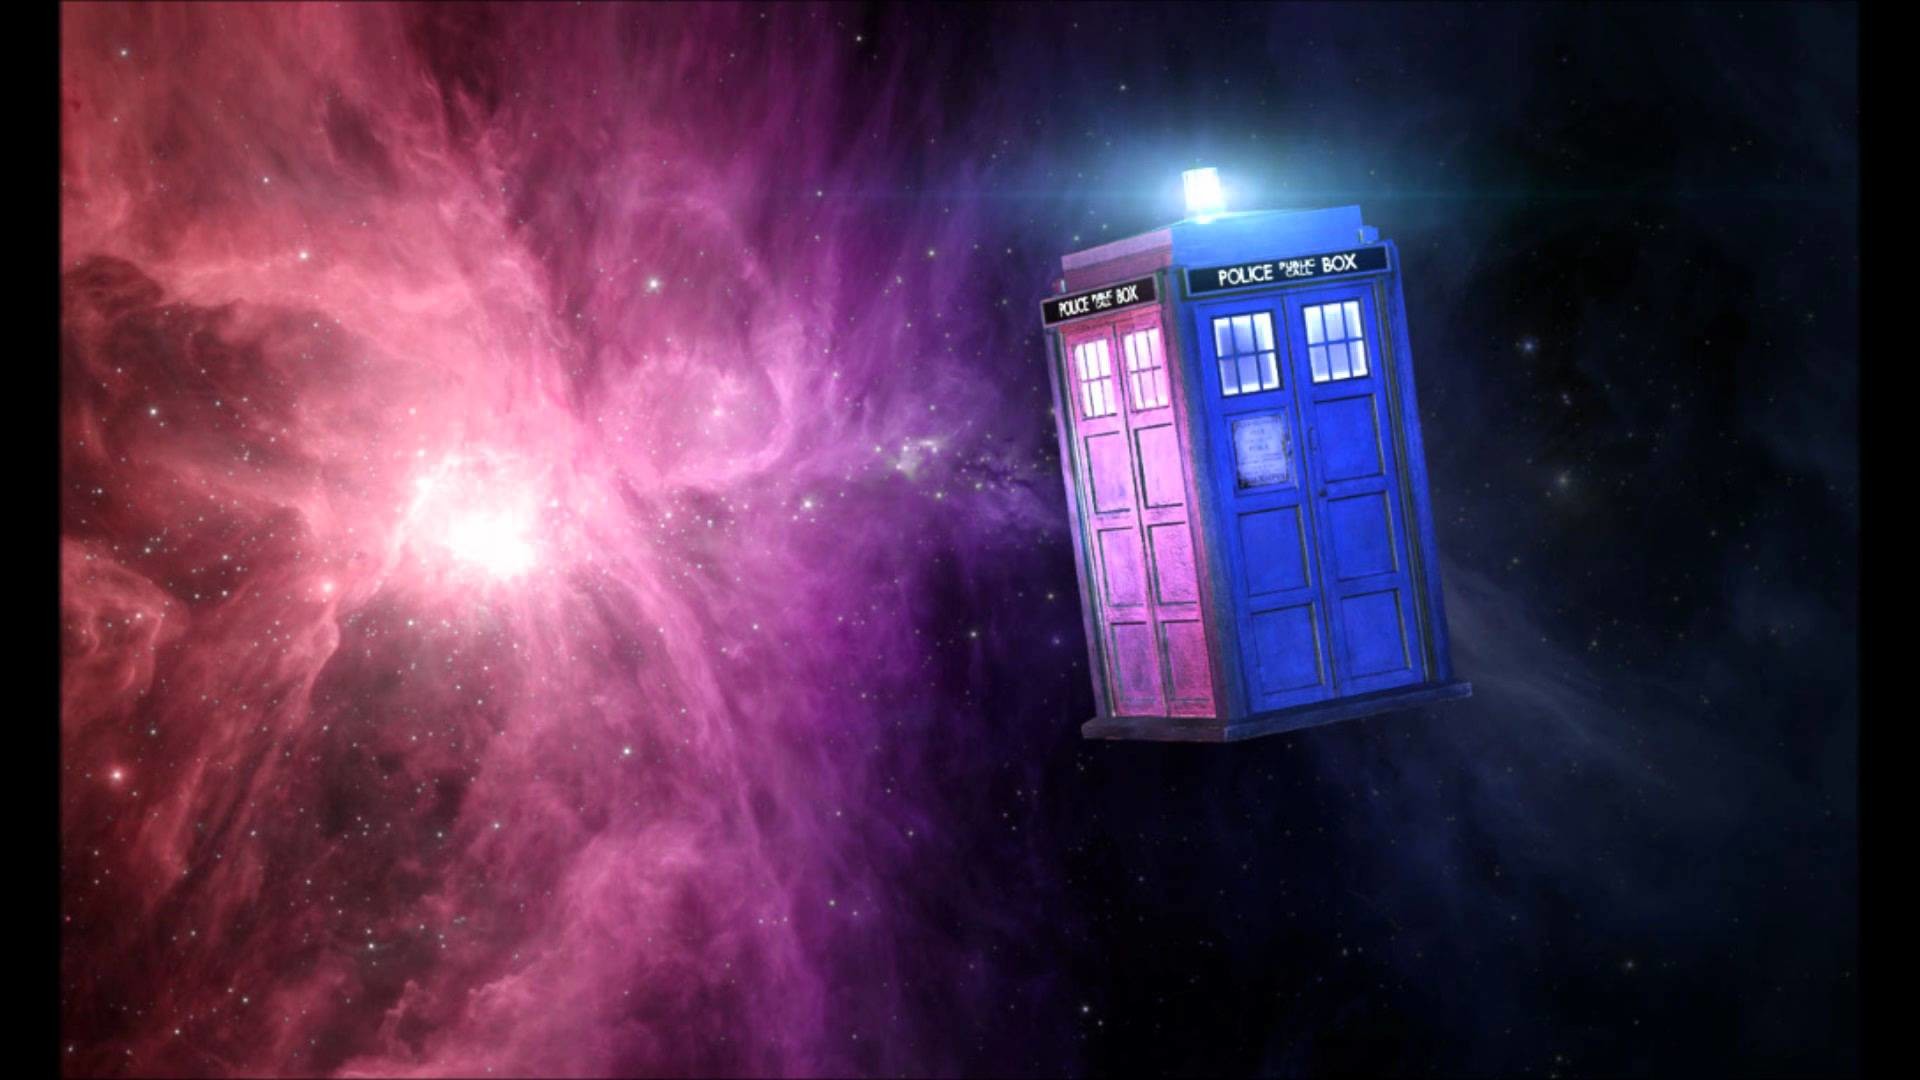 The acronym TARDIS stands for Time And Relative Dimension In Space. The TARDIS also changes its appearance to blend in with its surroundings